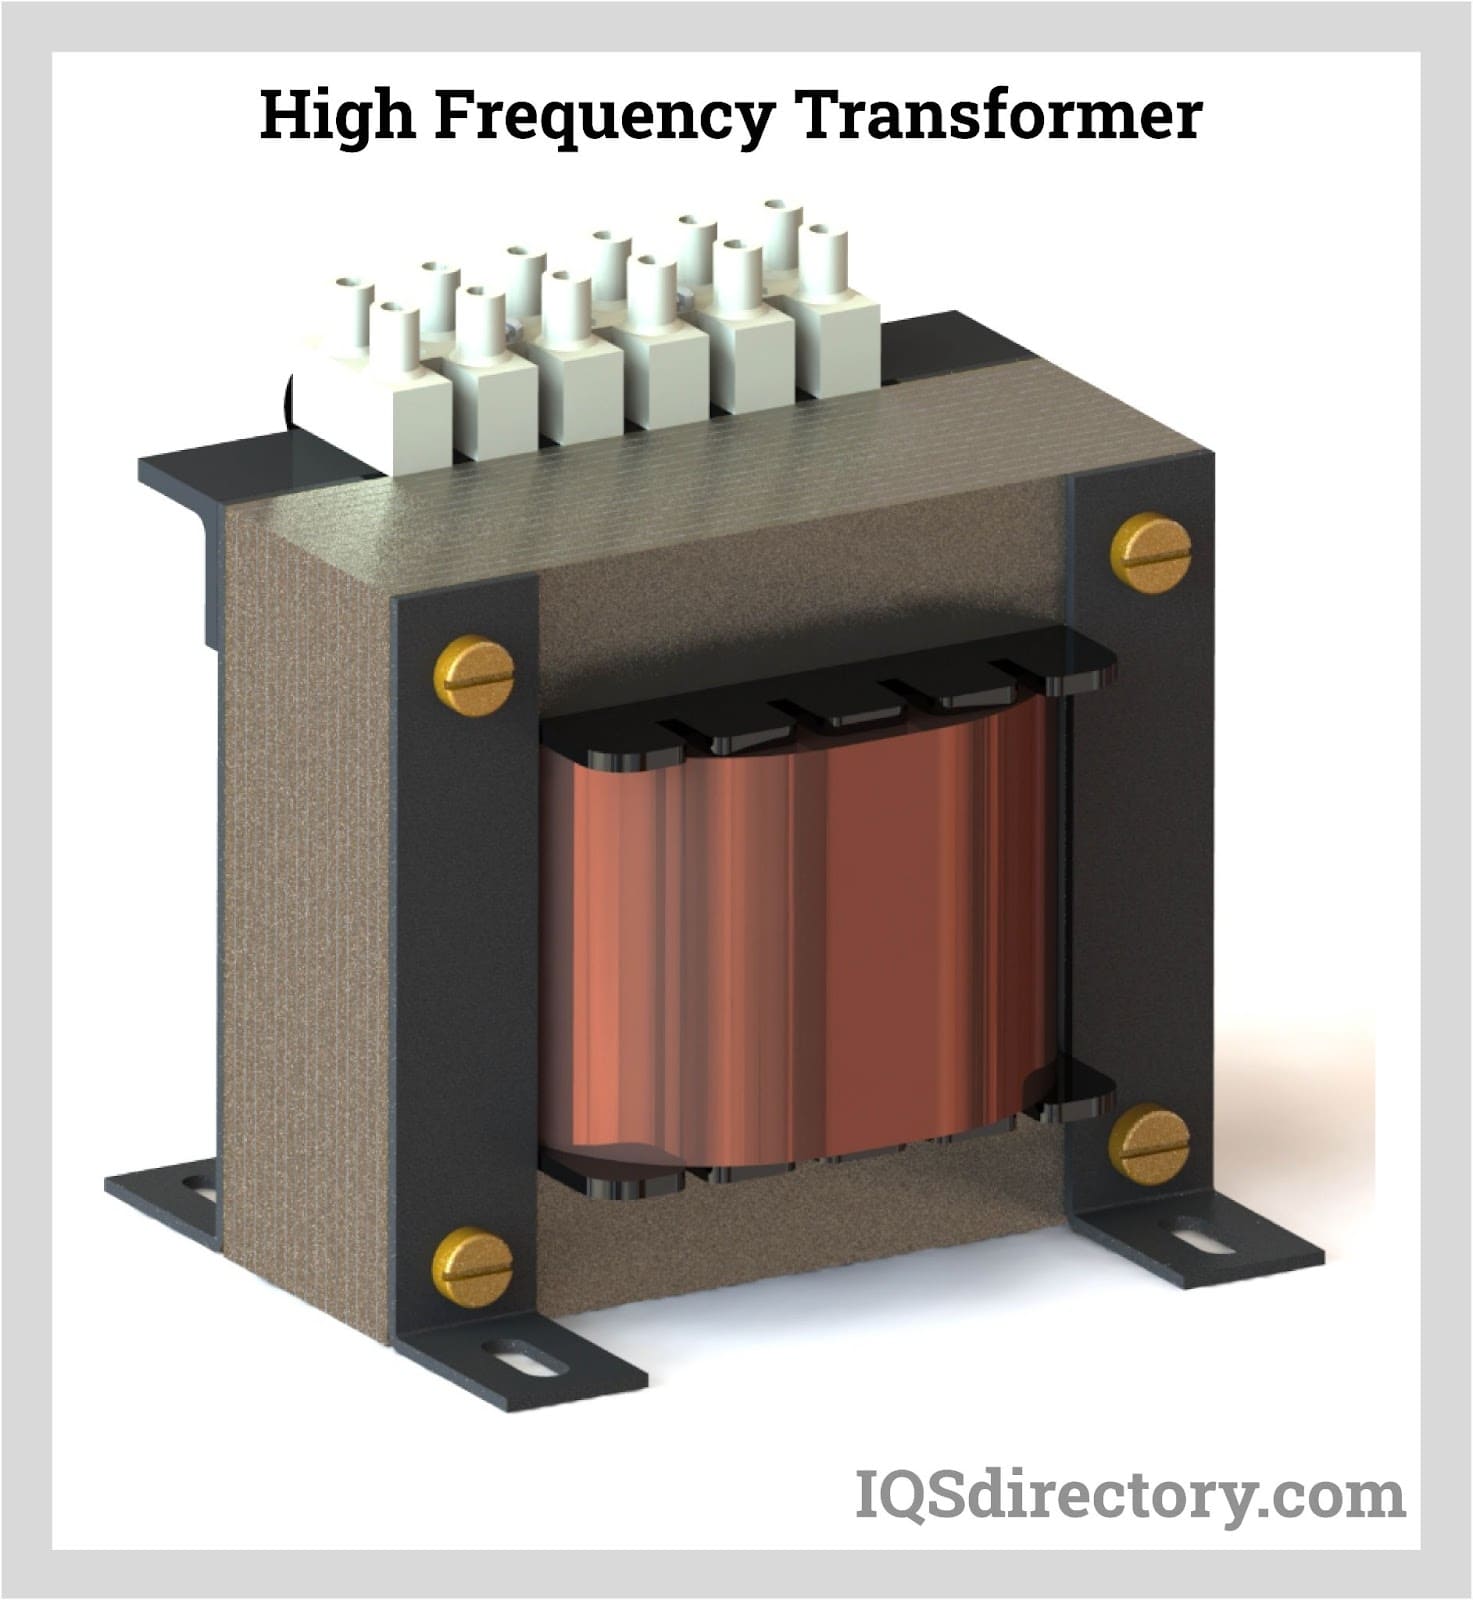 High Voltage Power Supply: Types, Applications, Benefits, and Components